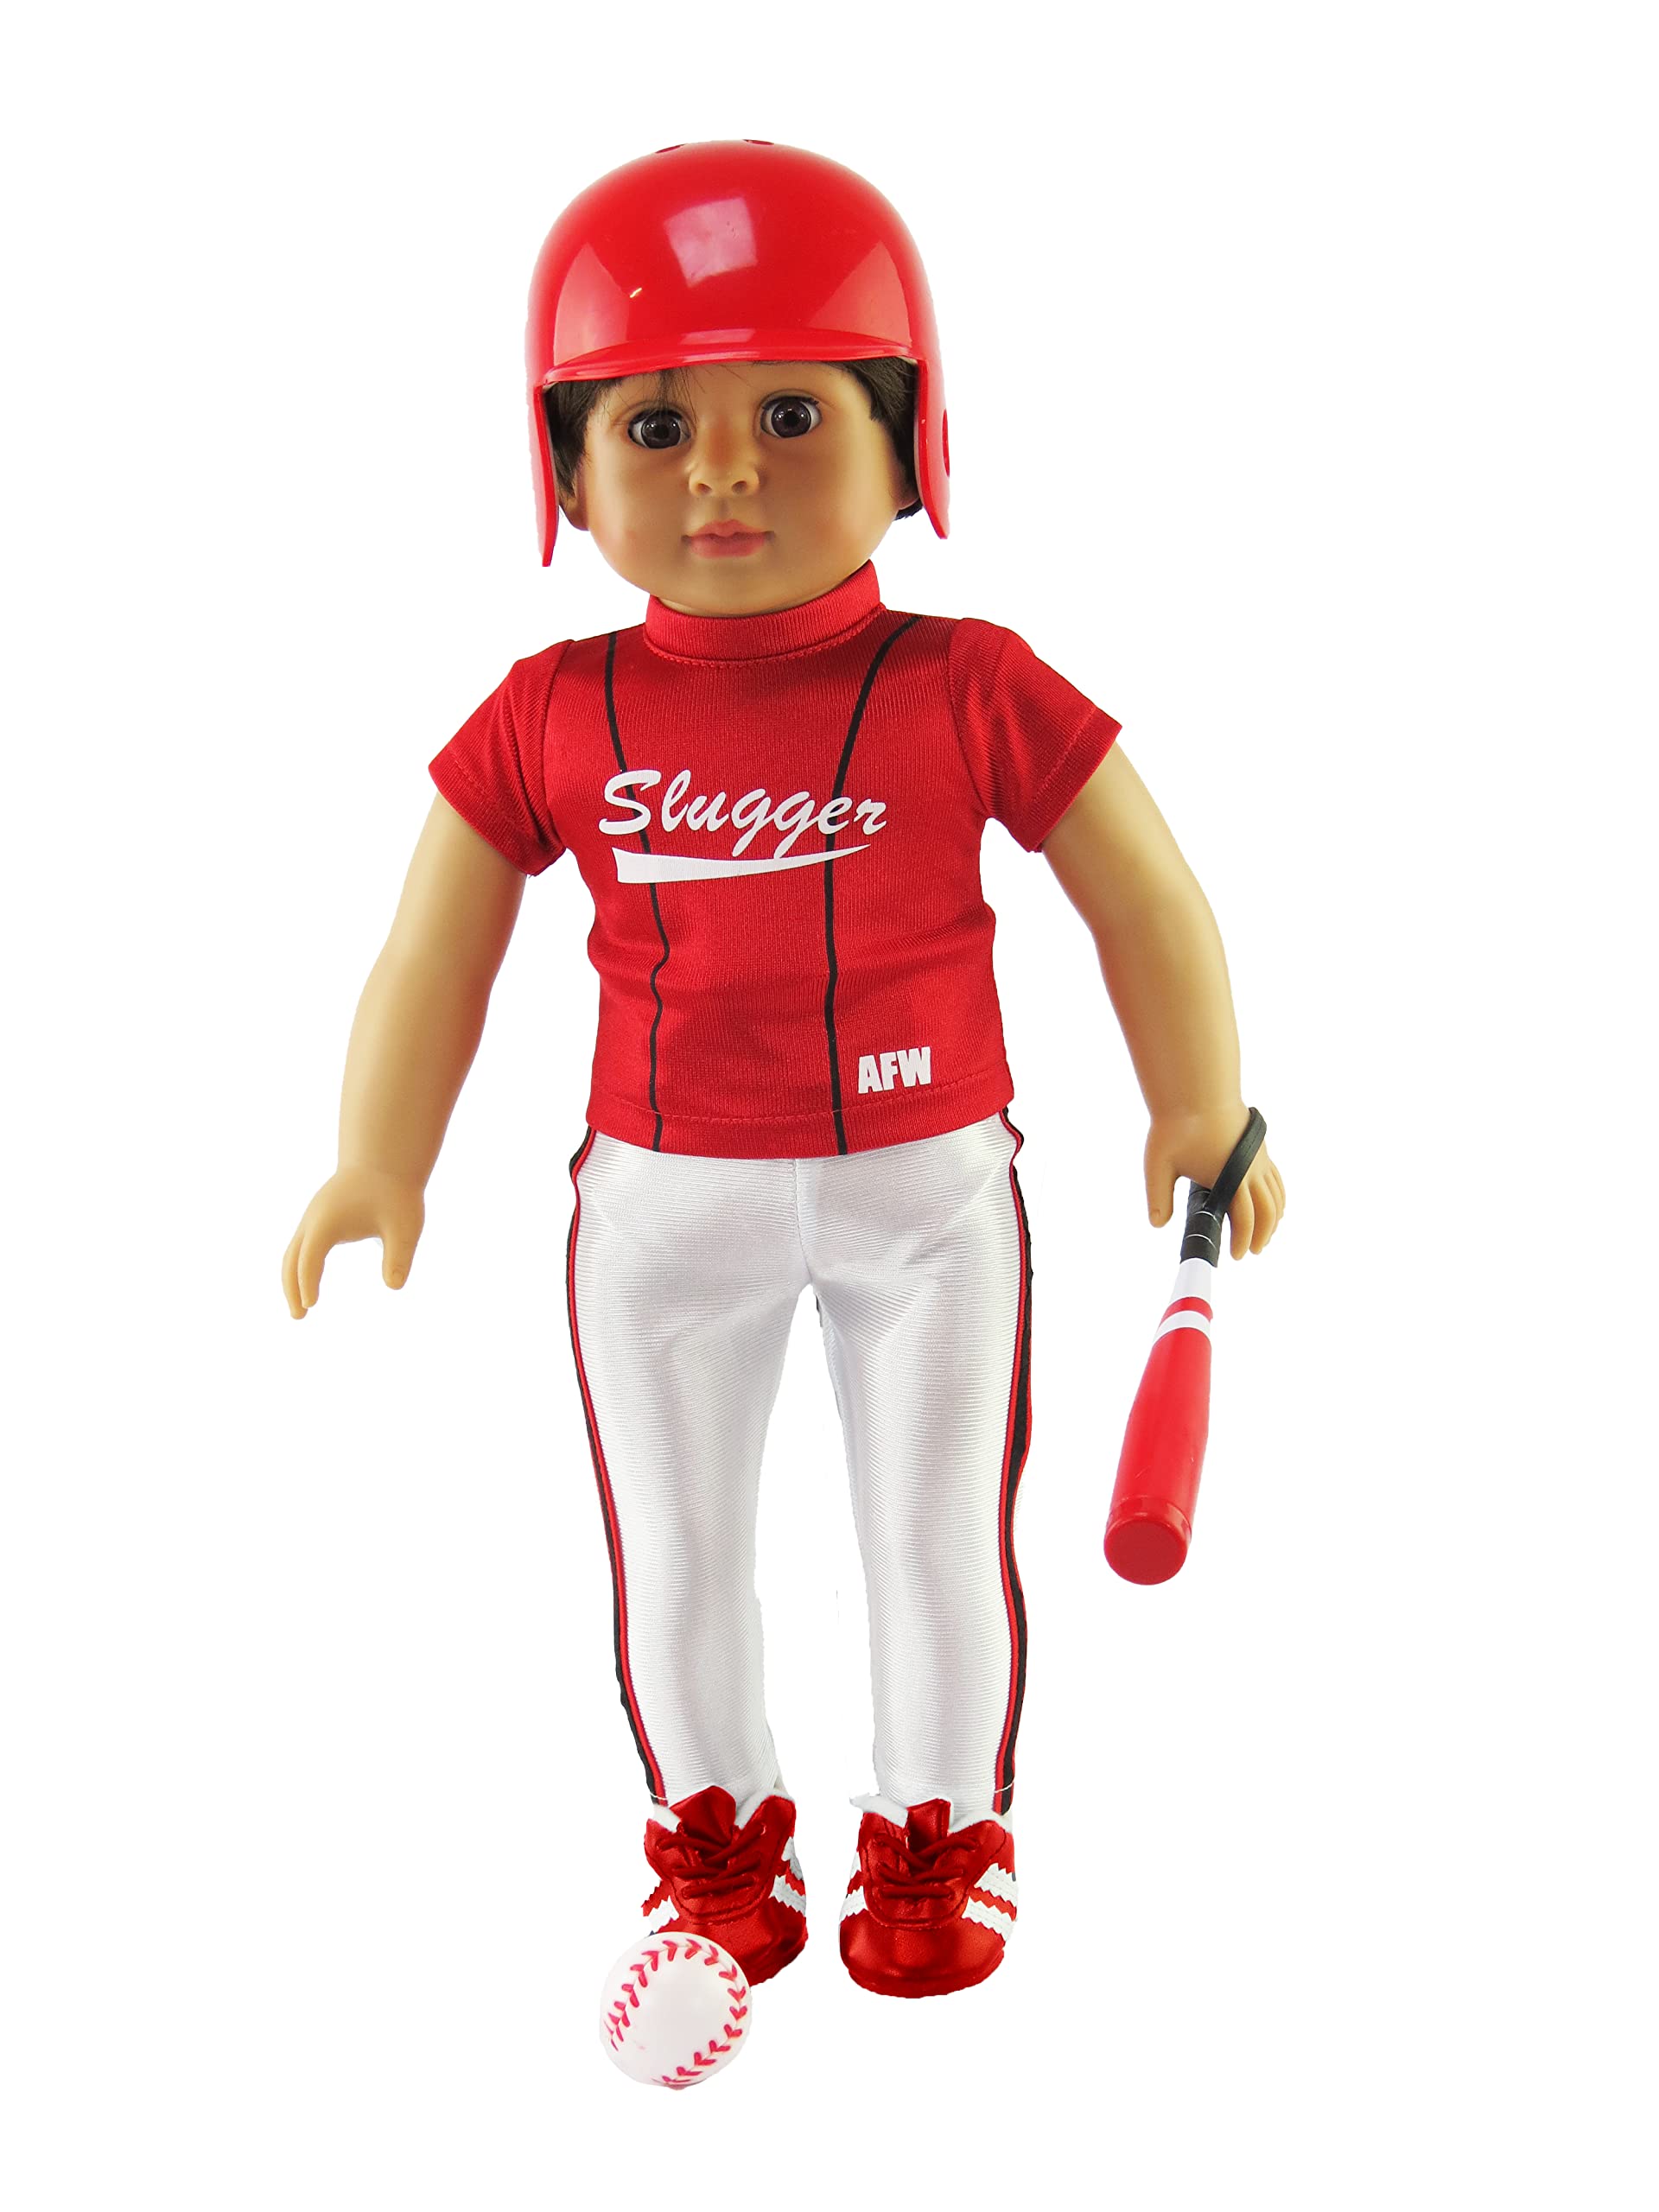 American Fashion World Red Baseball Uniform for 18-Inch Dolls | Accessories Included | Premium Quality & Trendy Design | Dolls Clothes | Outfit Fashions for Dolls for Popular Brands